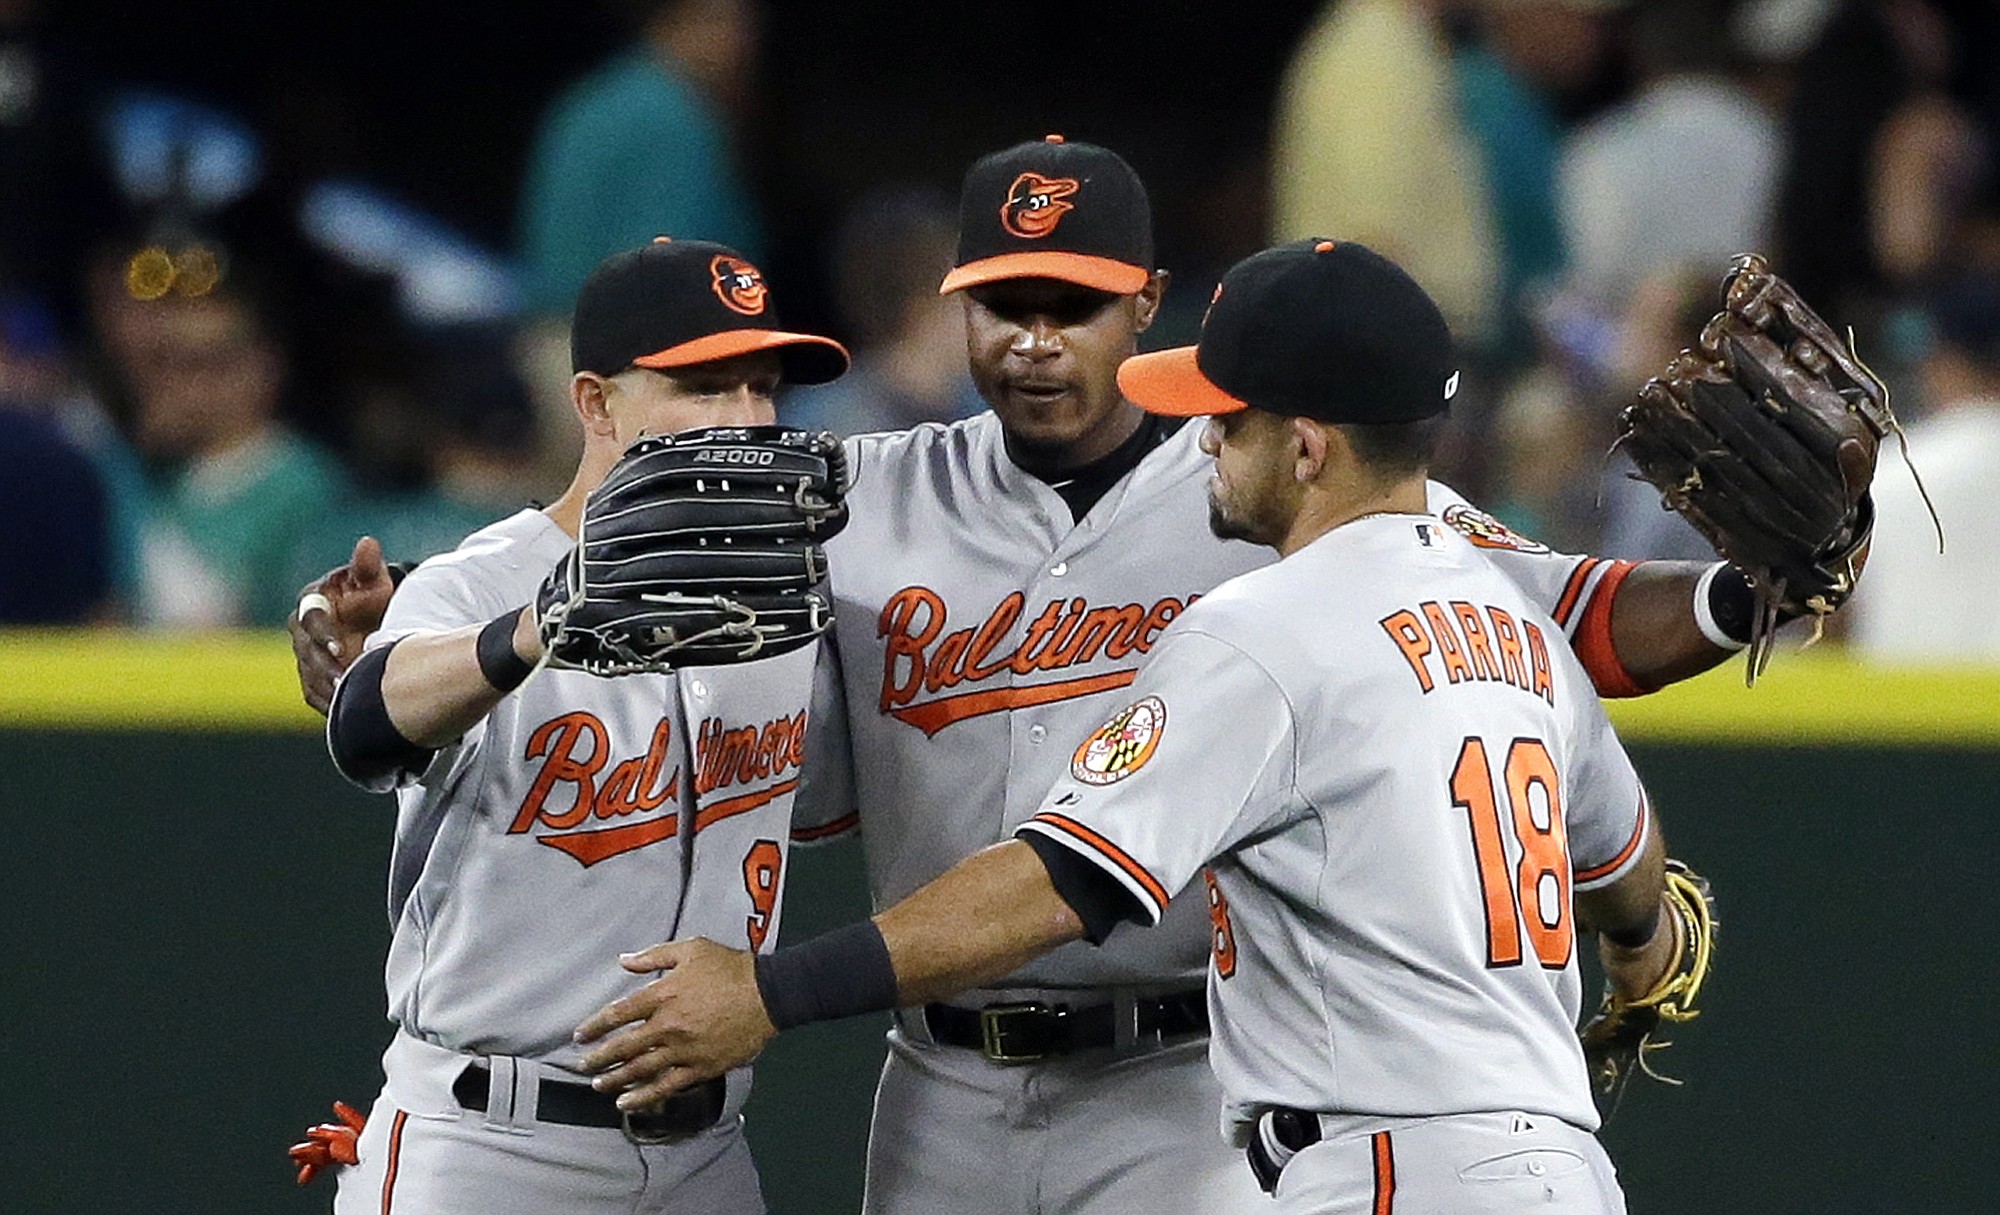 Baltimore Orioles outfielders David Lough (9), Adam Jones and Gerardo Parra (18) hug after the team beat the Seattle Mariners 3-2 on Monday, Aug. 10, 2015, in Seattle.